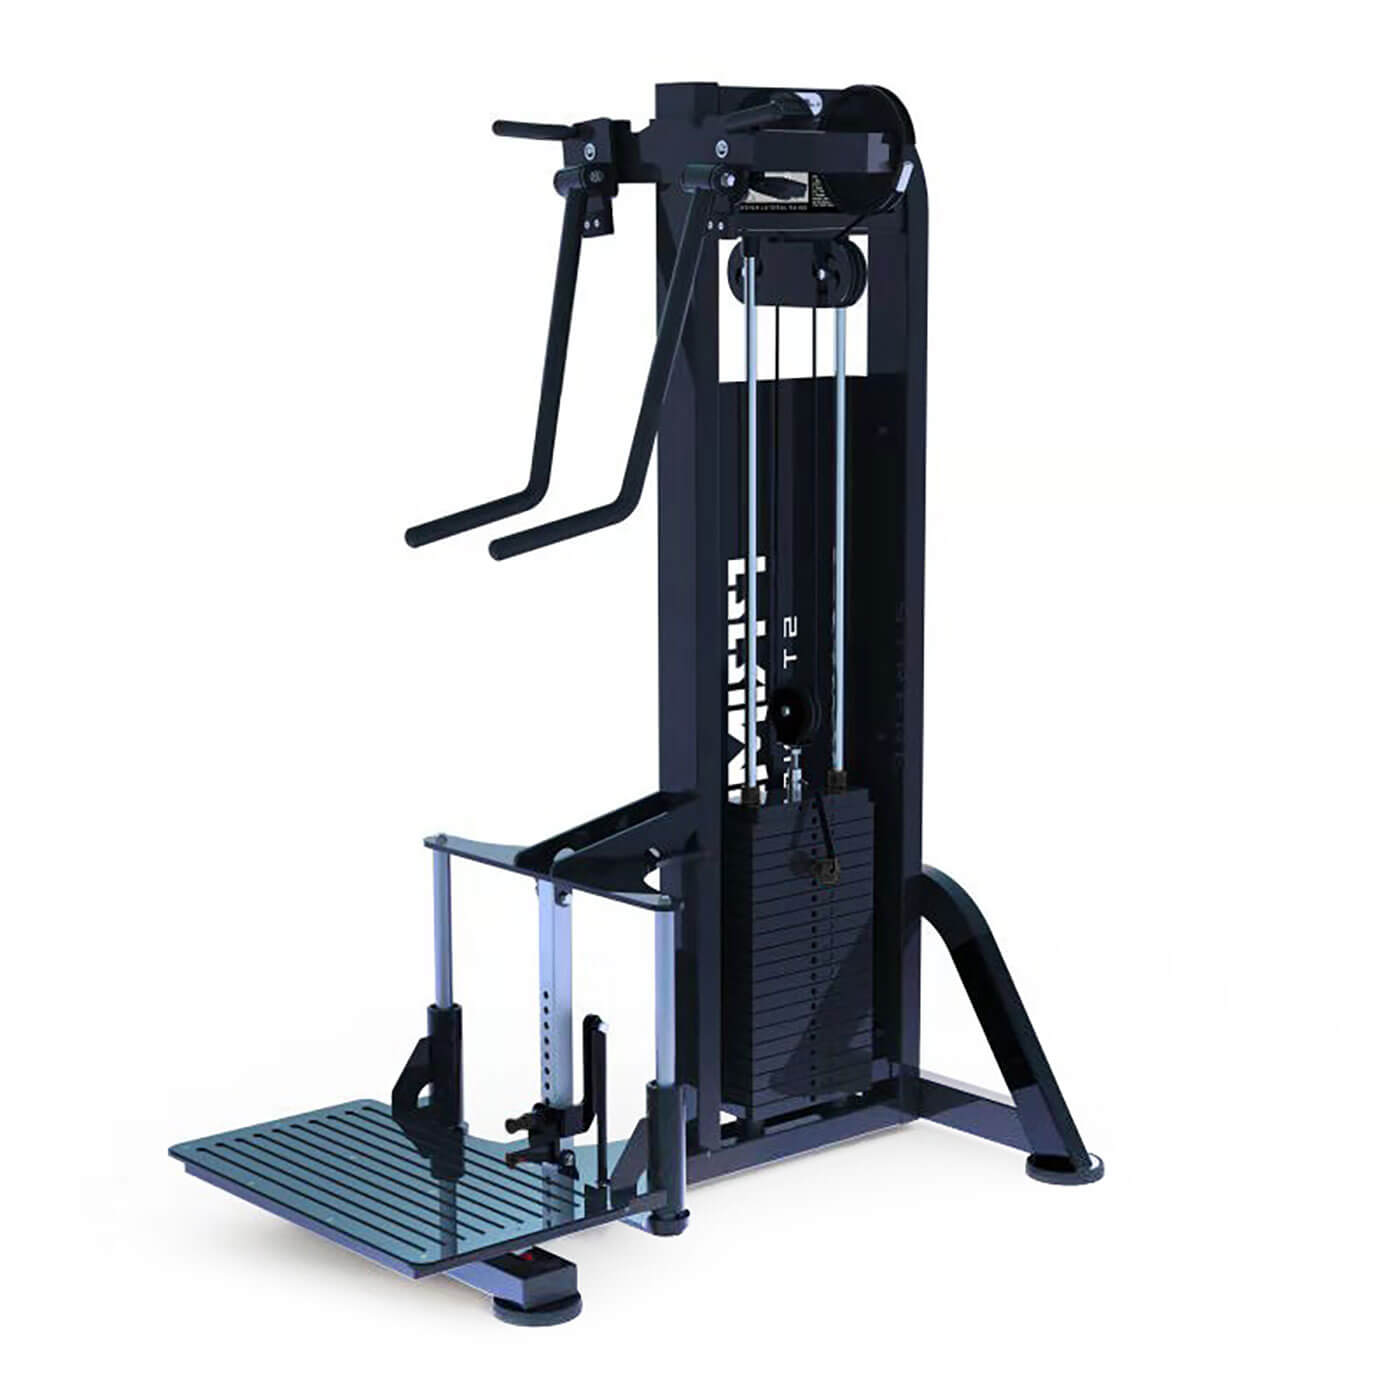 a commercial lateral raise gym resistance machine